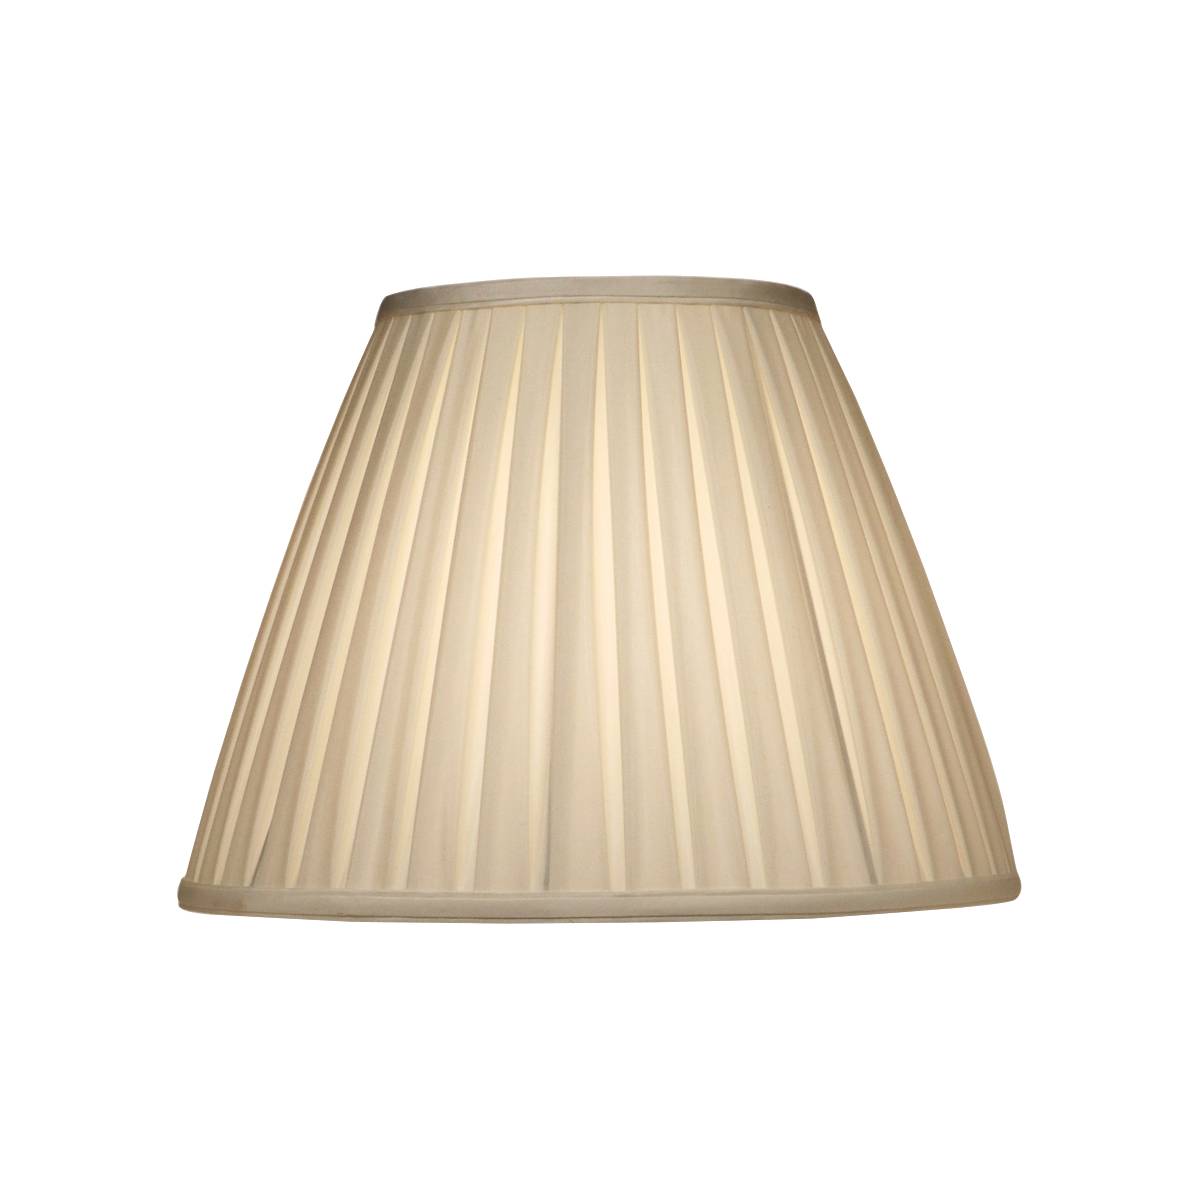 Uno, Lamp Shades | Lamps Plus